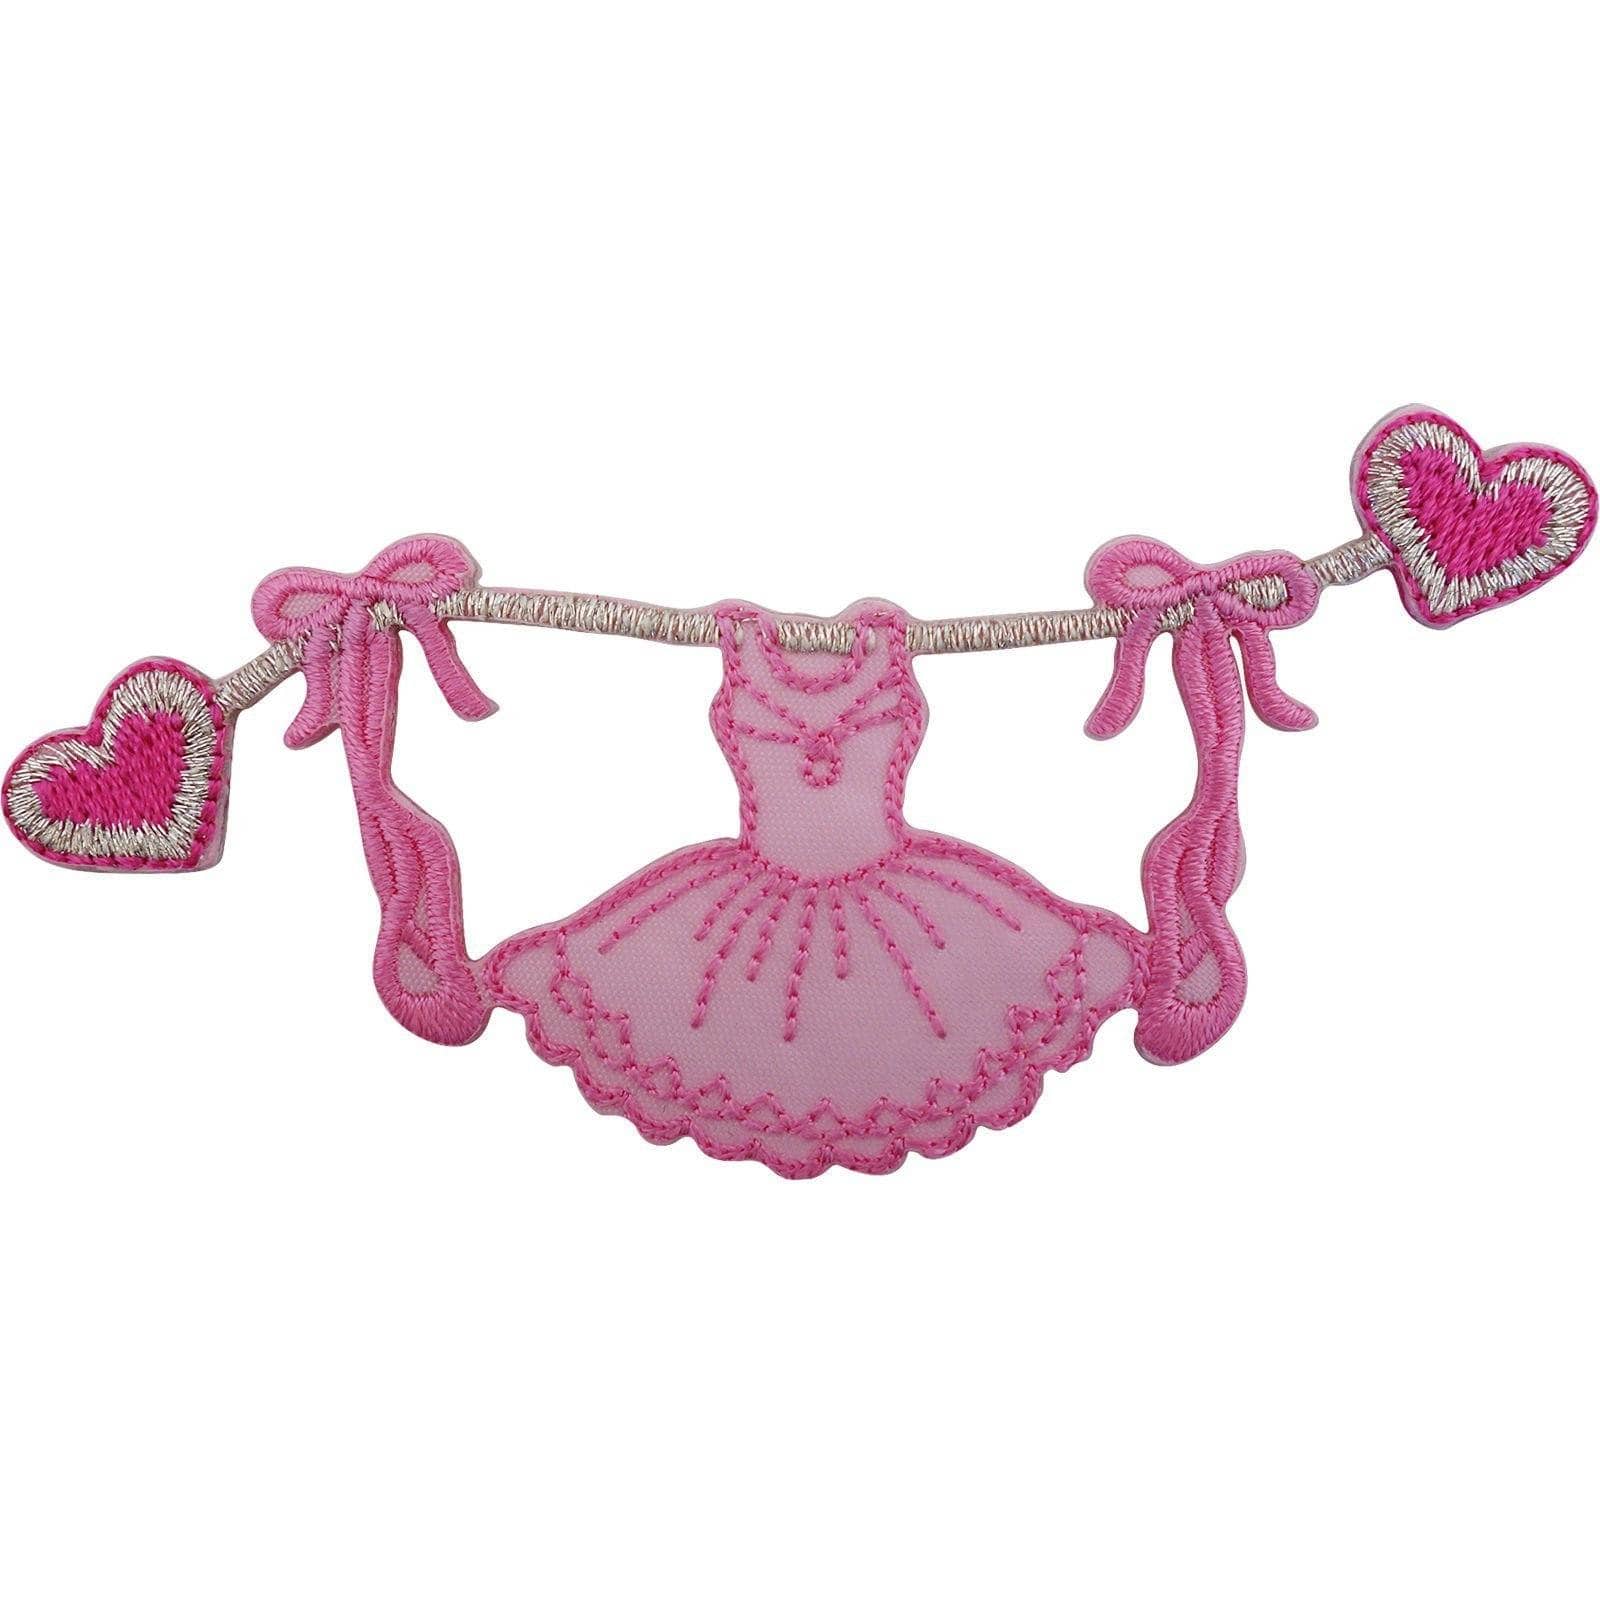 Ballerina Iron On Patch Sew On Badge Embroidered Pink Ballet Dress Shoes Hearts